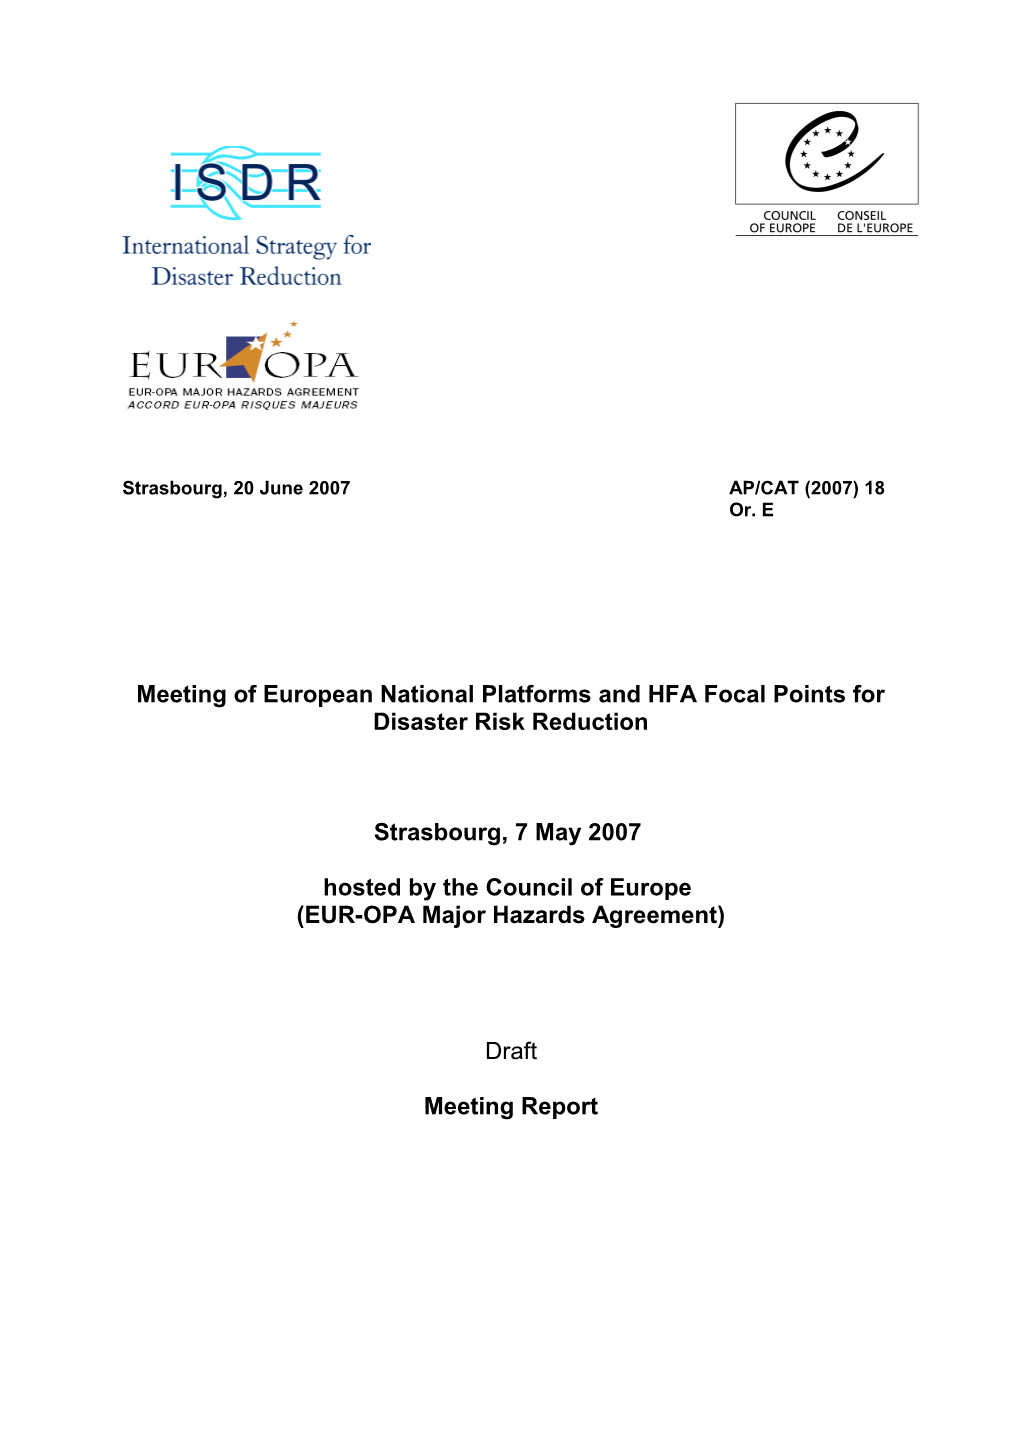 Meeting of European National Platforms and HFA Focal Points for Disaster Risk Reduction